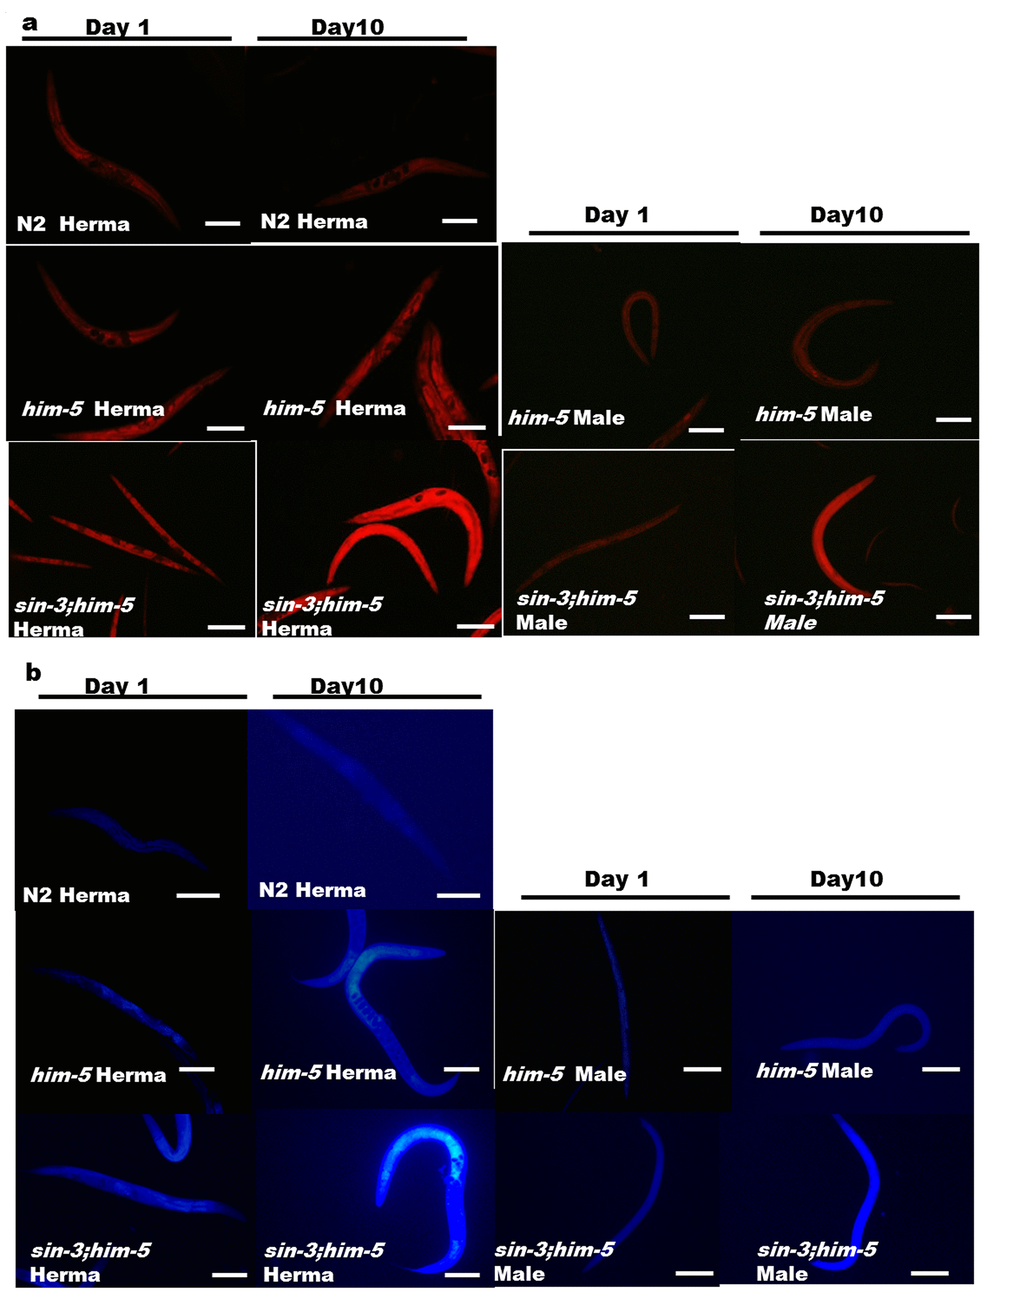 Enhanced age associated lipid and lipofuscin deposition in the sin-3;him-5mutants (a) sin-3;him-5 hermaphrodite and male as compared to worms from him-5(e1490) and wild-type N2 worms at day one and day ten of attaining adulthood. (b) Enhanced age associated death pigment lipofuscin was observed in the sin-3;him-5 hermaphrodite and male as compared to worms from him-5(e1490) and wild-type N2 worms at day one and day ten of attaining adulthood. Visualization was done using NIKON fluorescence microscope. Magnification 400X, scale: 500 µm. 30 worms per strain were visualized and the experiment was repeated thrice.